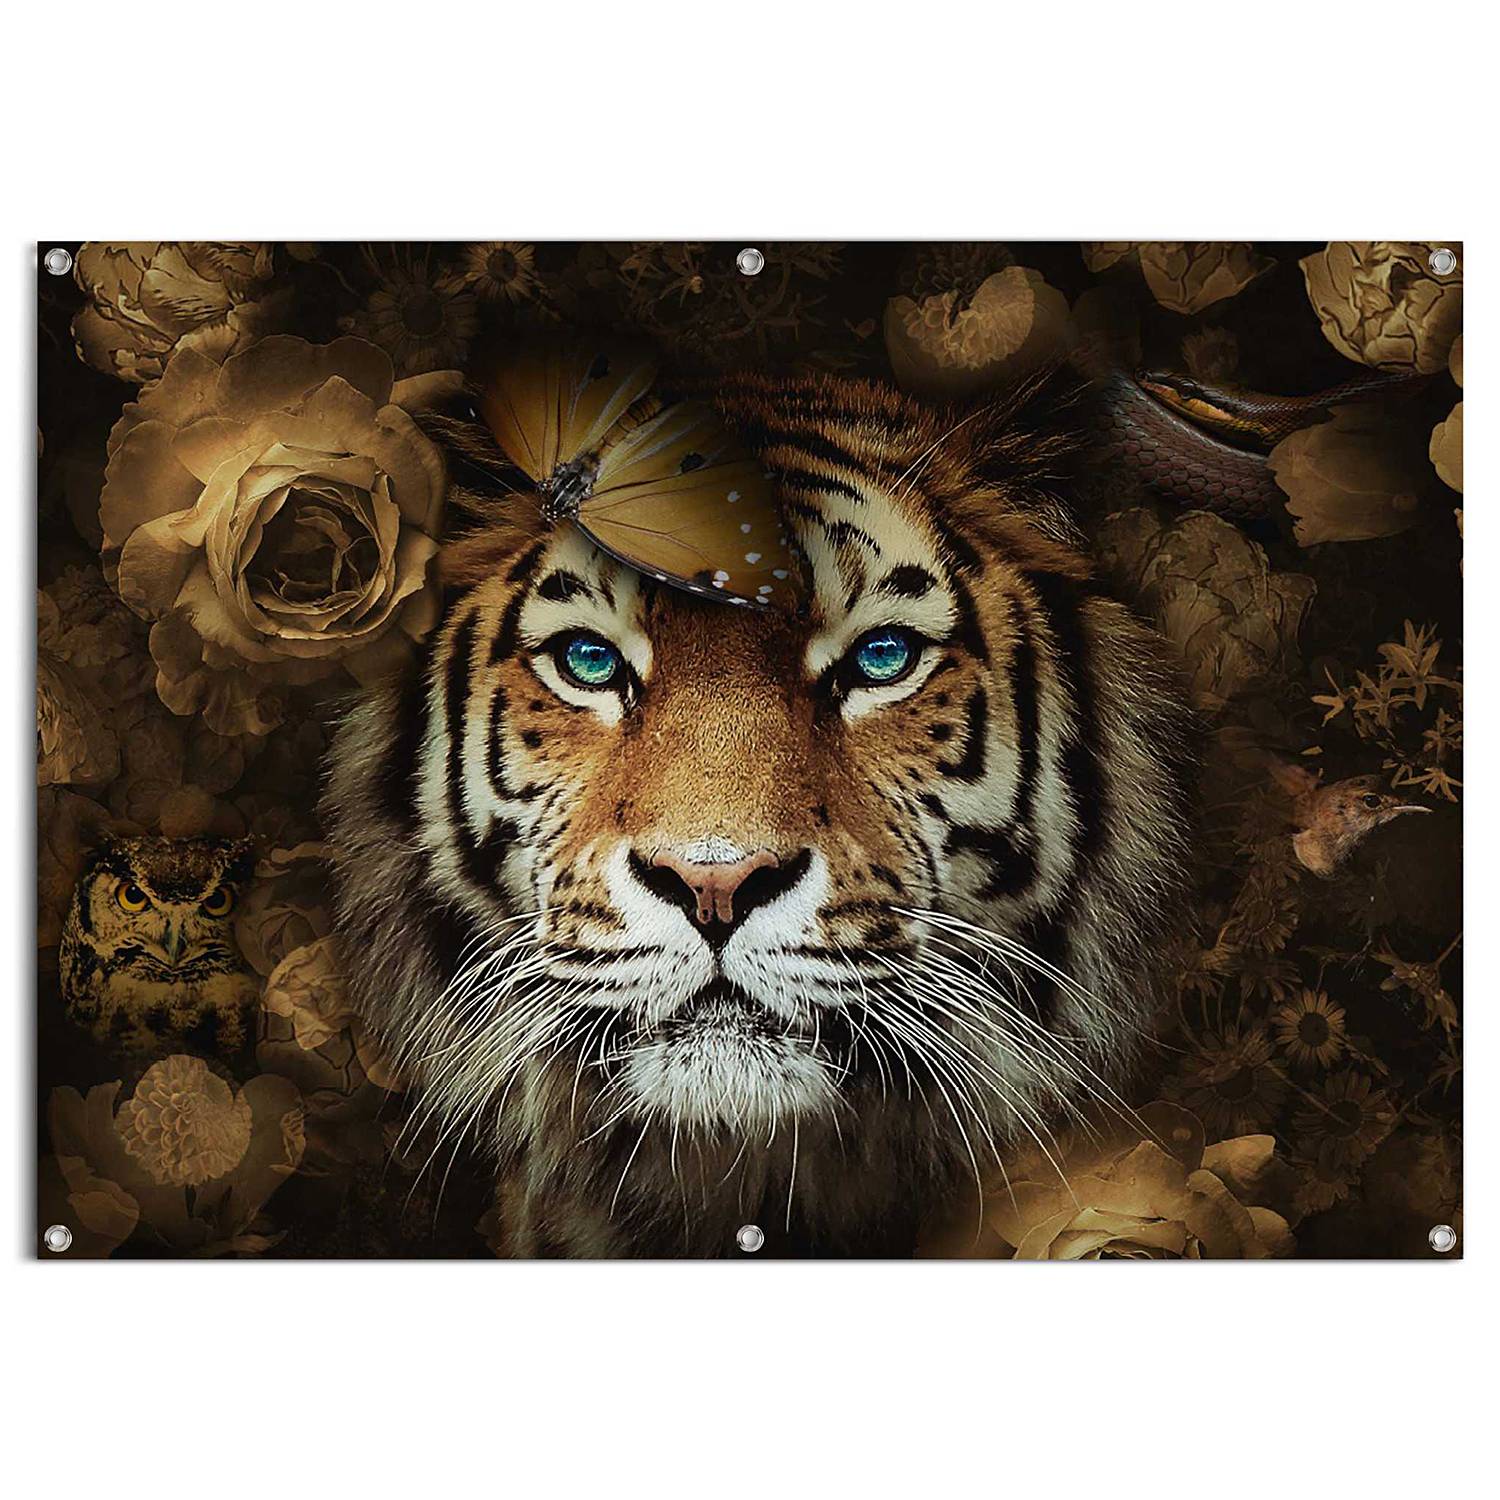 Outdoor-Poster Tiger kaufen | home24 | Poster